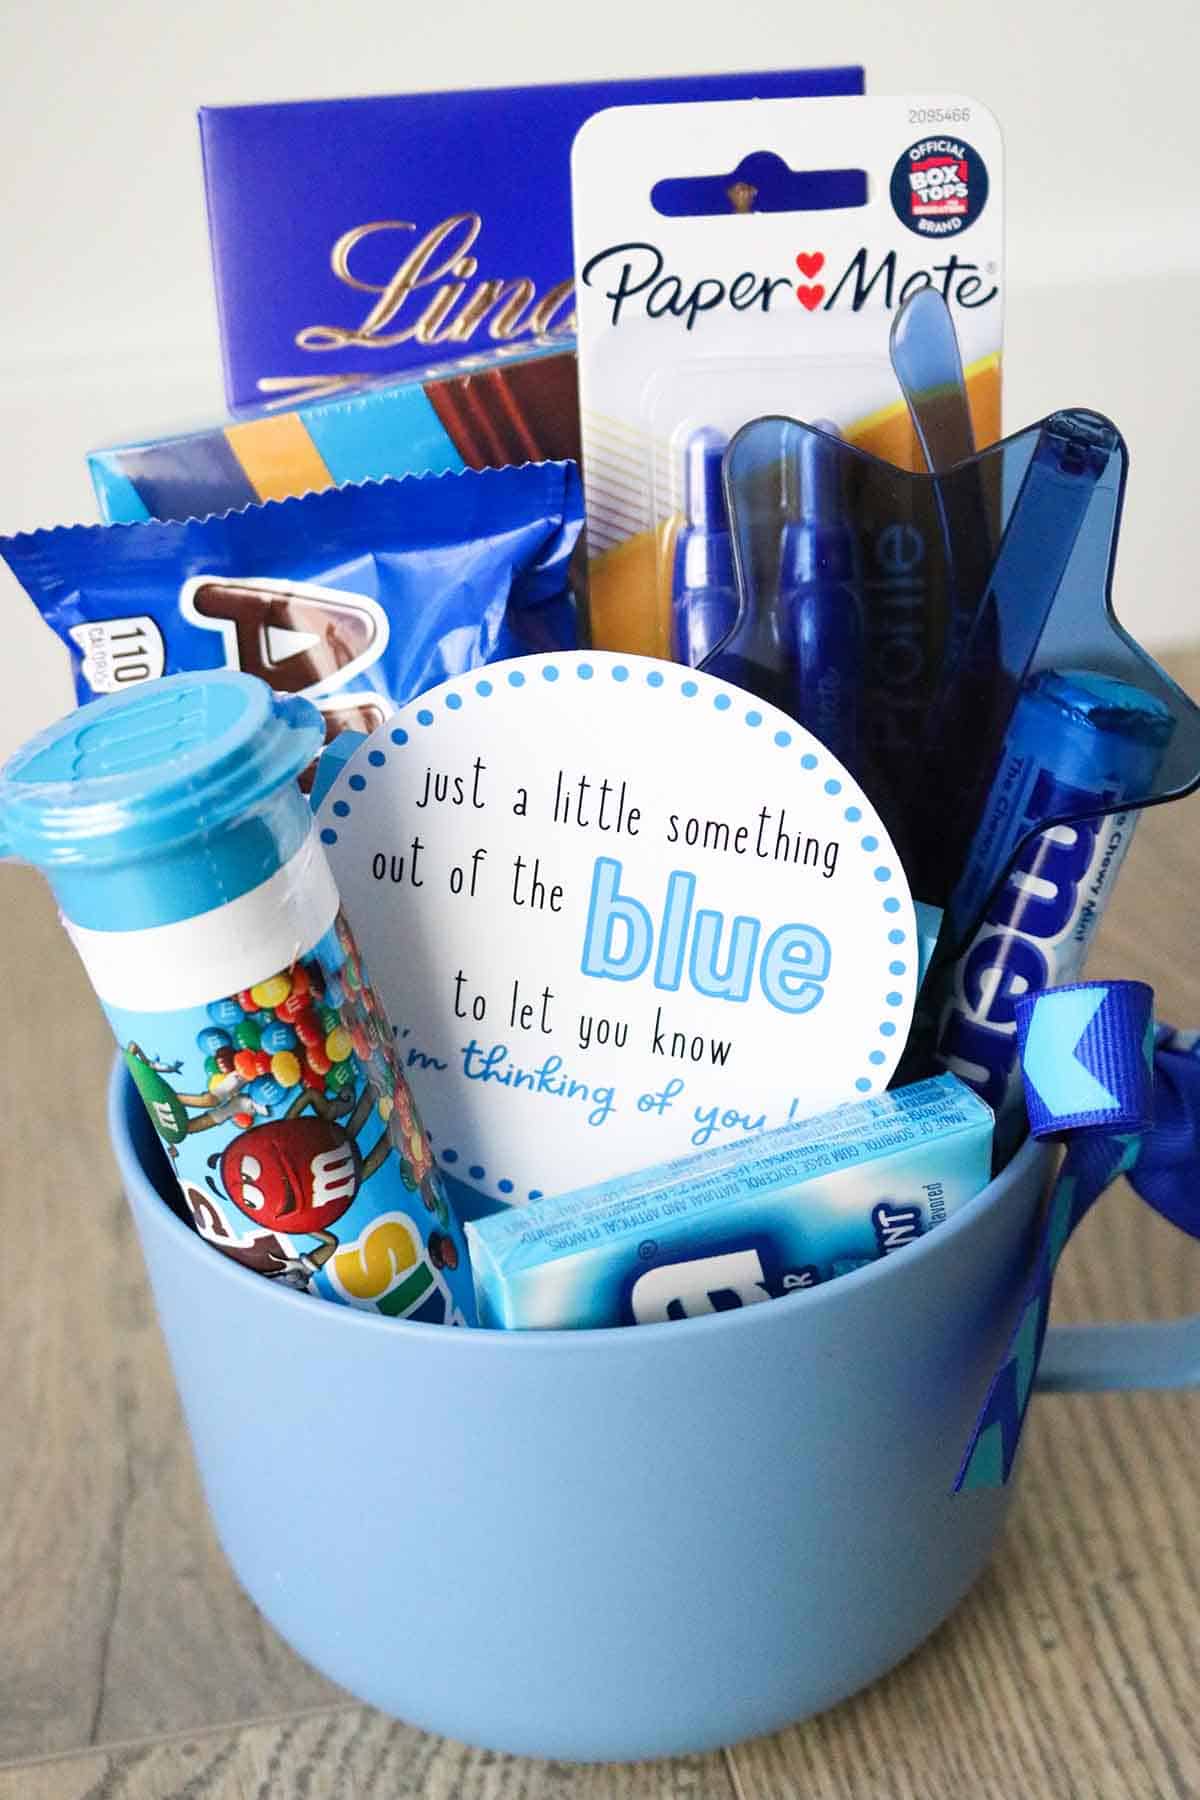 "just a little something out of the blue to let you know I'm thinking of you" free printable gift tag for a blue themed gift basket